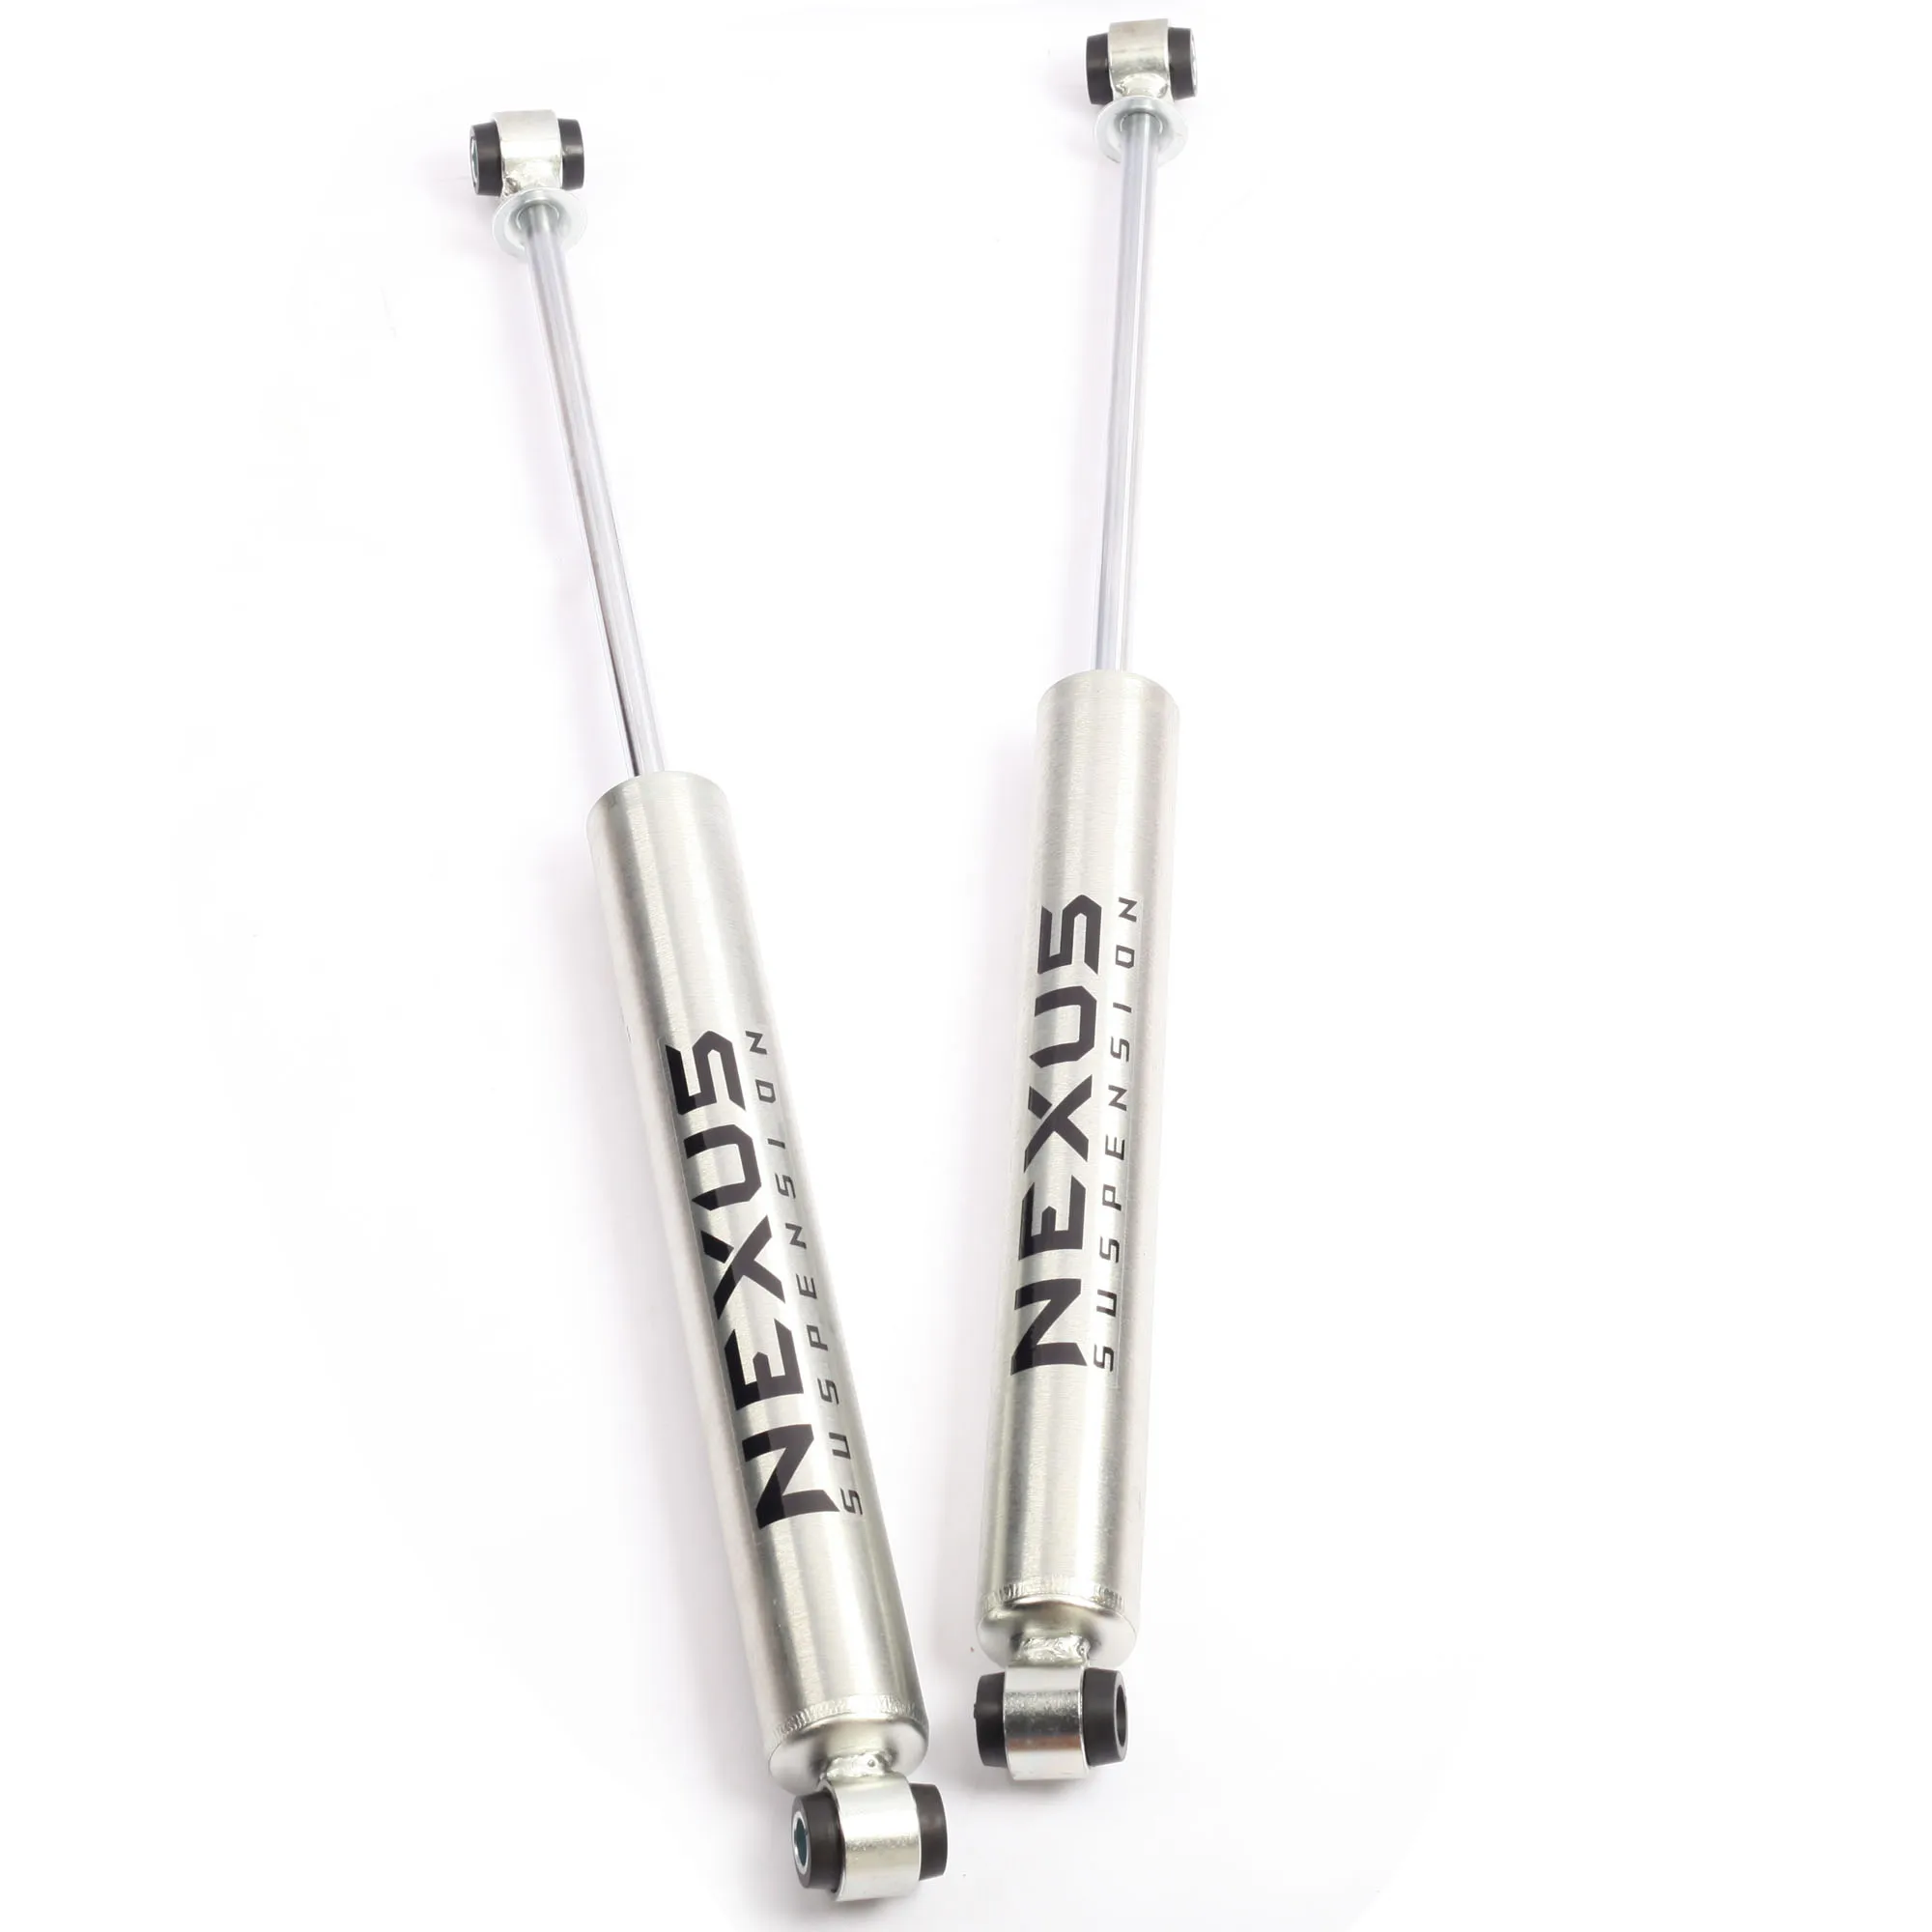 

6Inch Lift Rear Shock Absorber for 2000-2012 GMC Yukon XL 1500 4WD,Zinc Plated Coating,Pair Pack